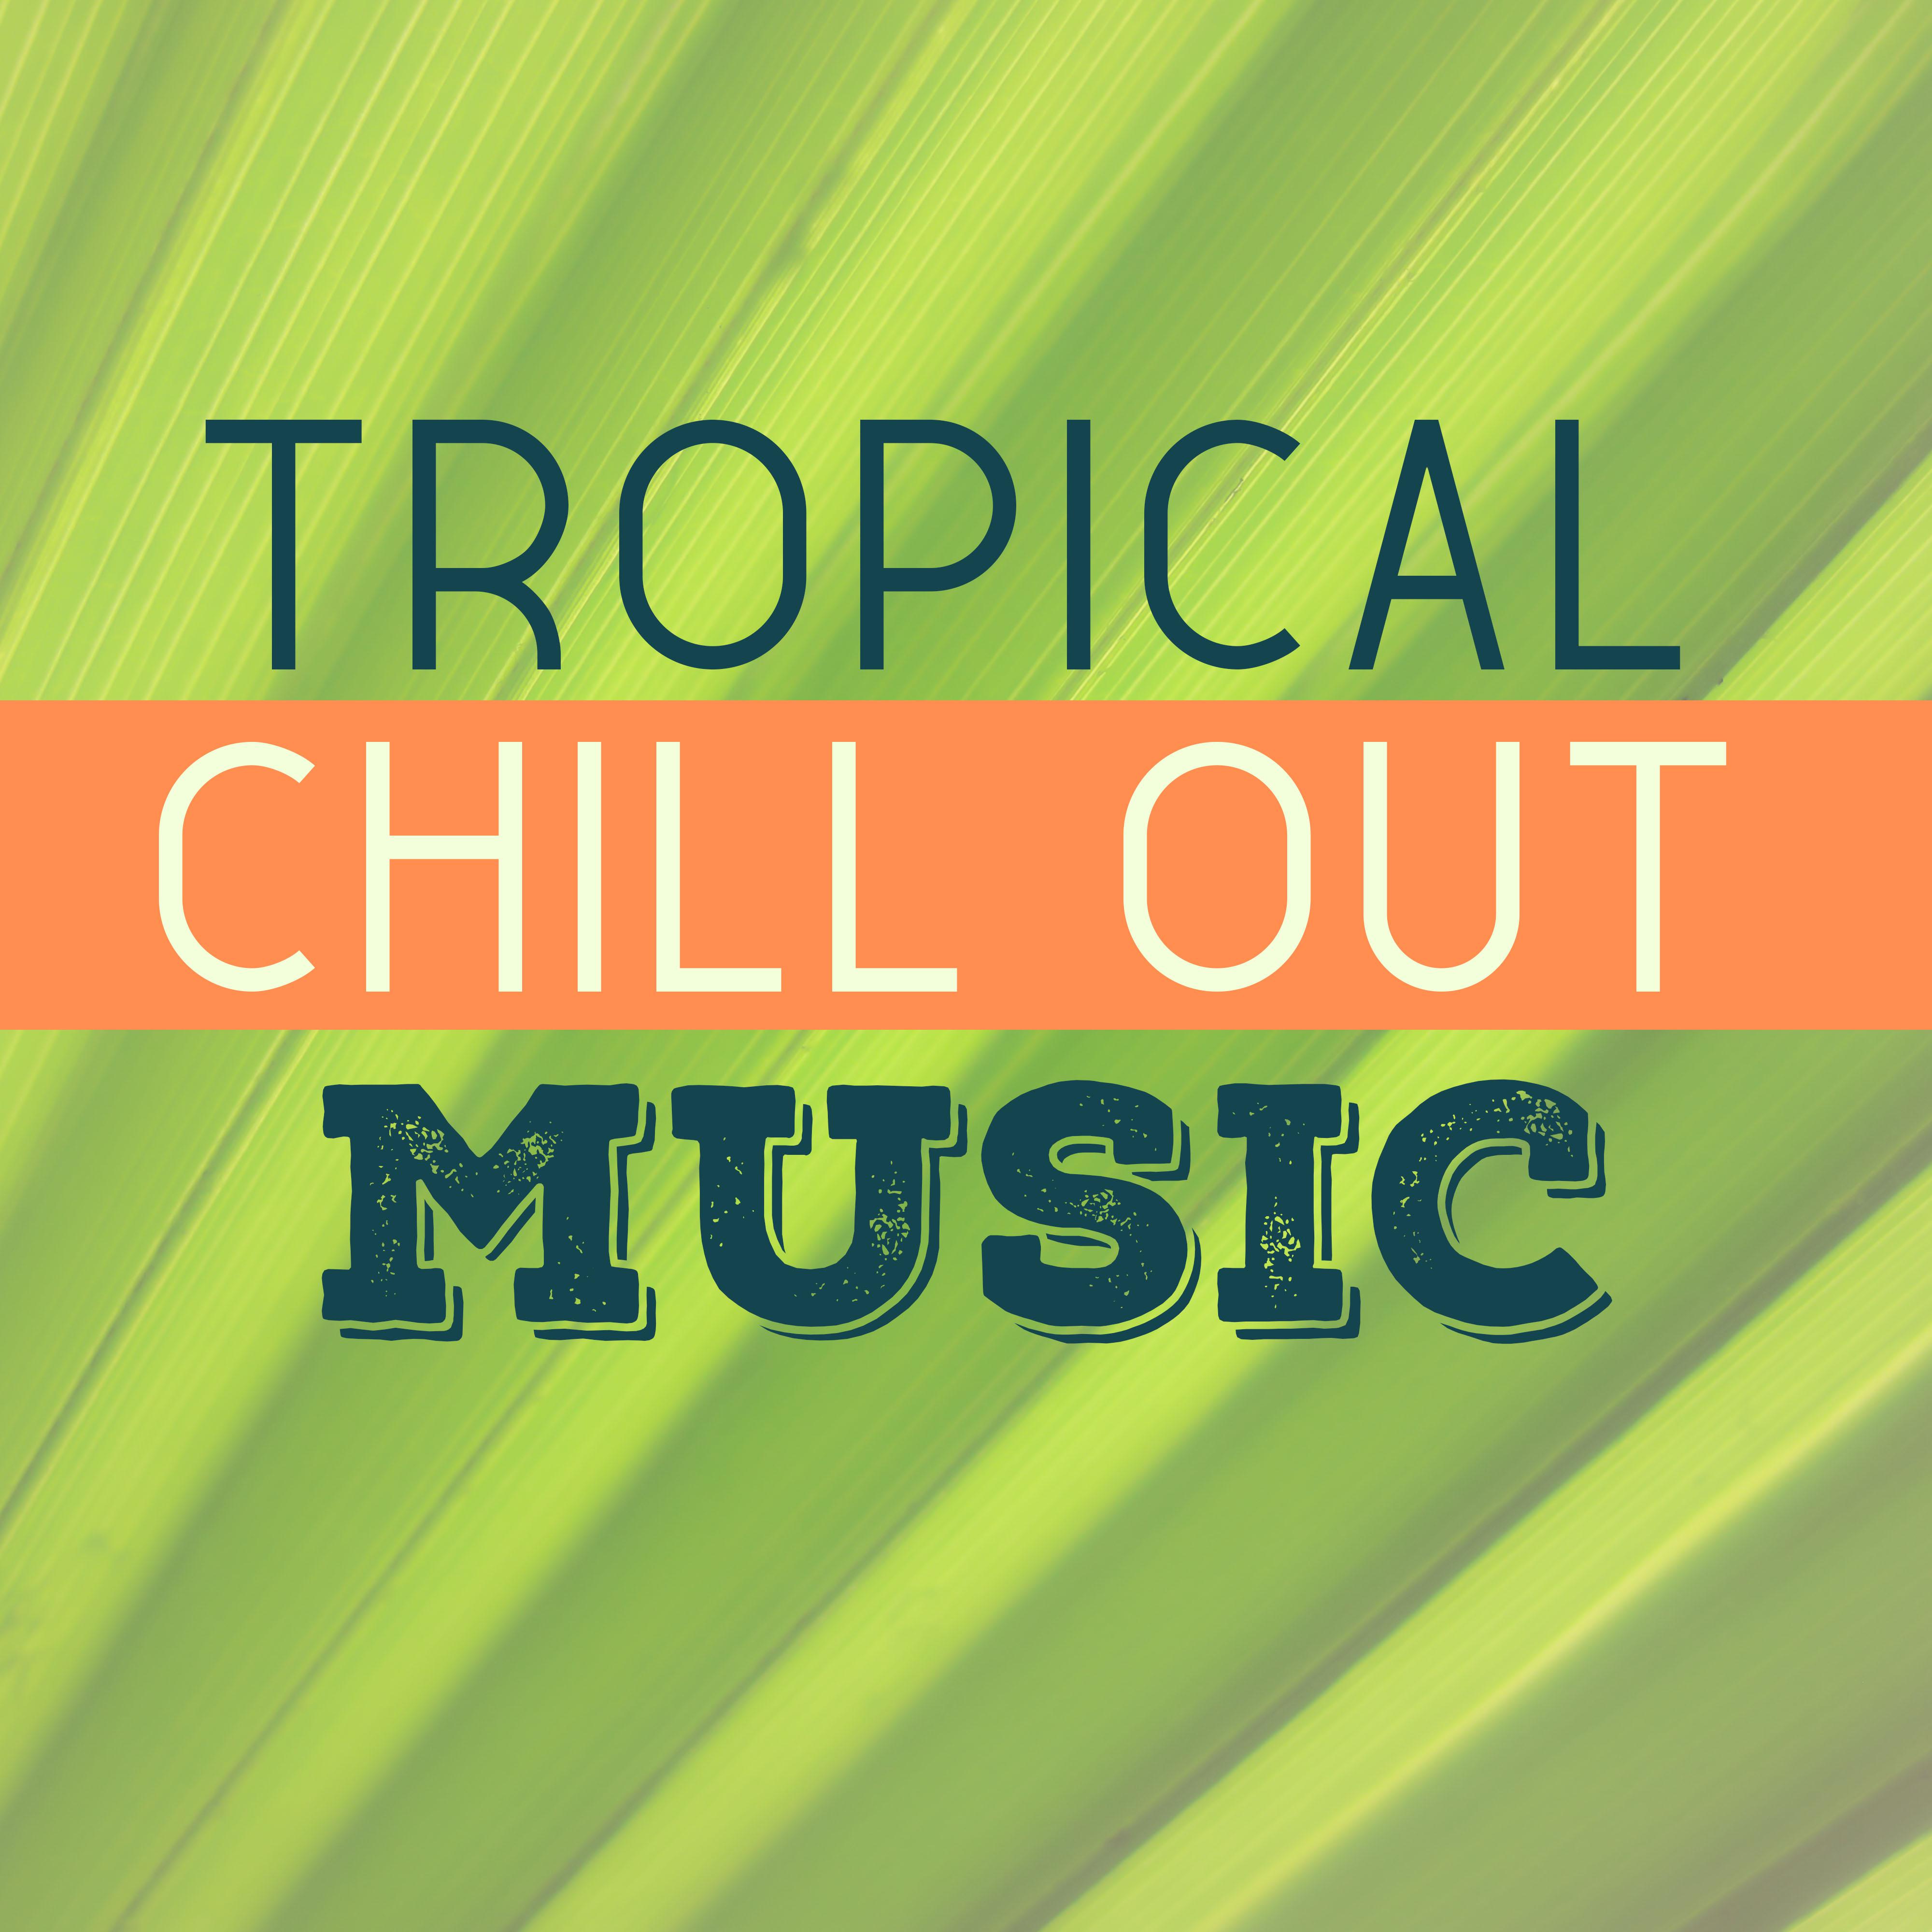 Tropical Chill Out Music – Peaceful Mind, Soft Vibes, Beach Chill, Pure Waves, Relax Under Palms, Holiday Chill